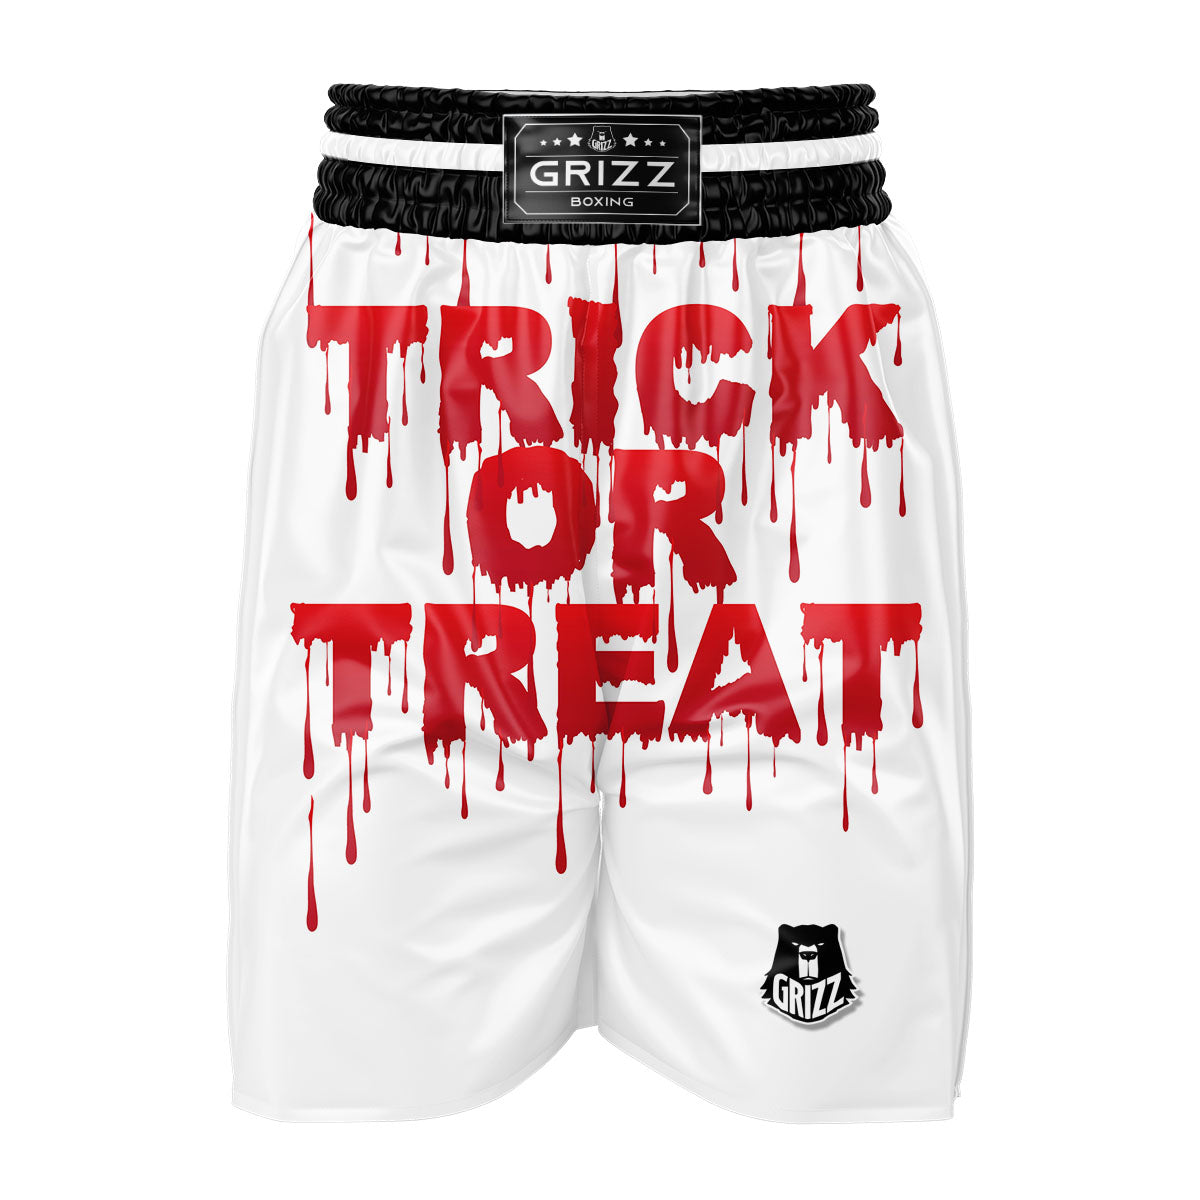 Trick or Treat boxer shorts